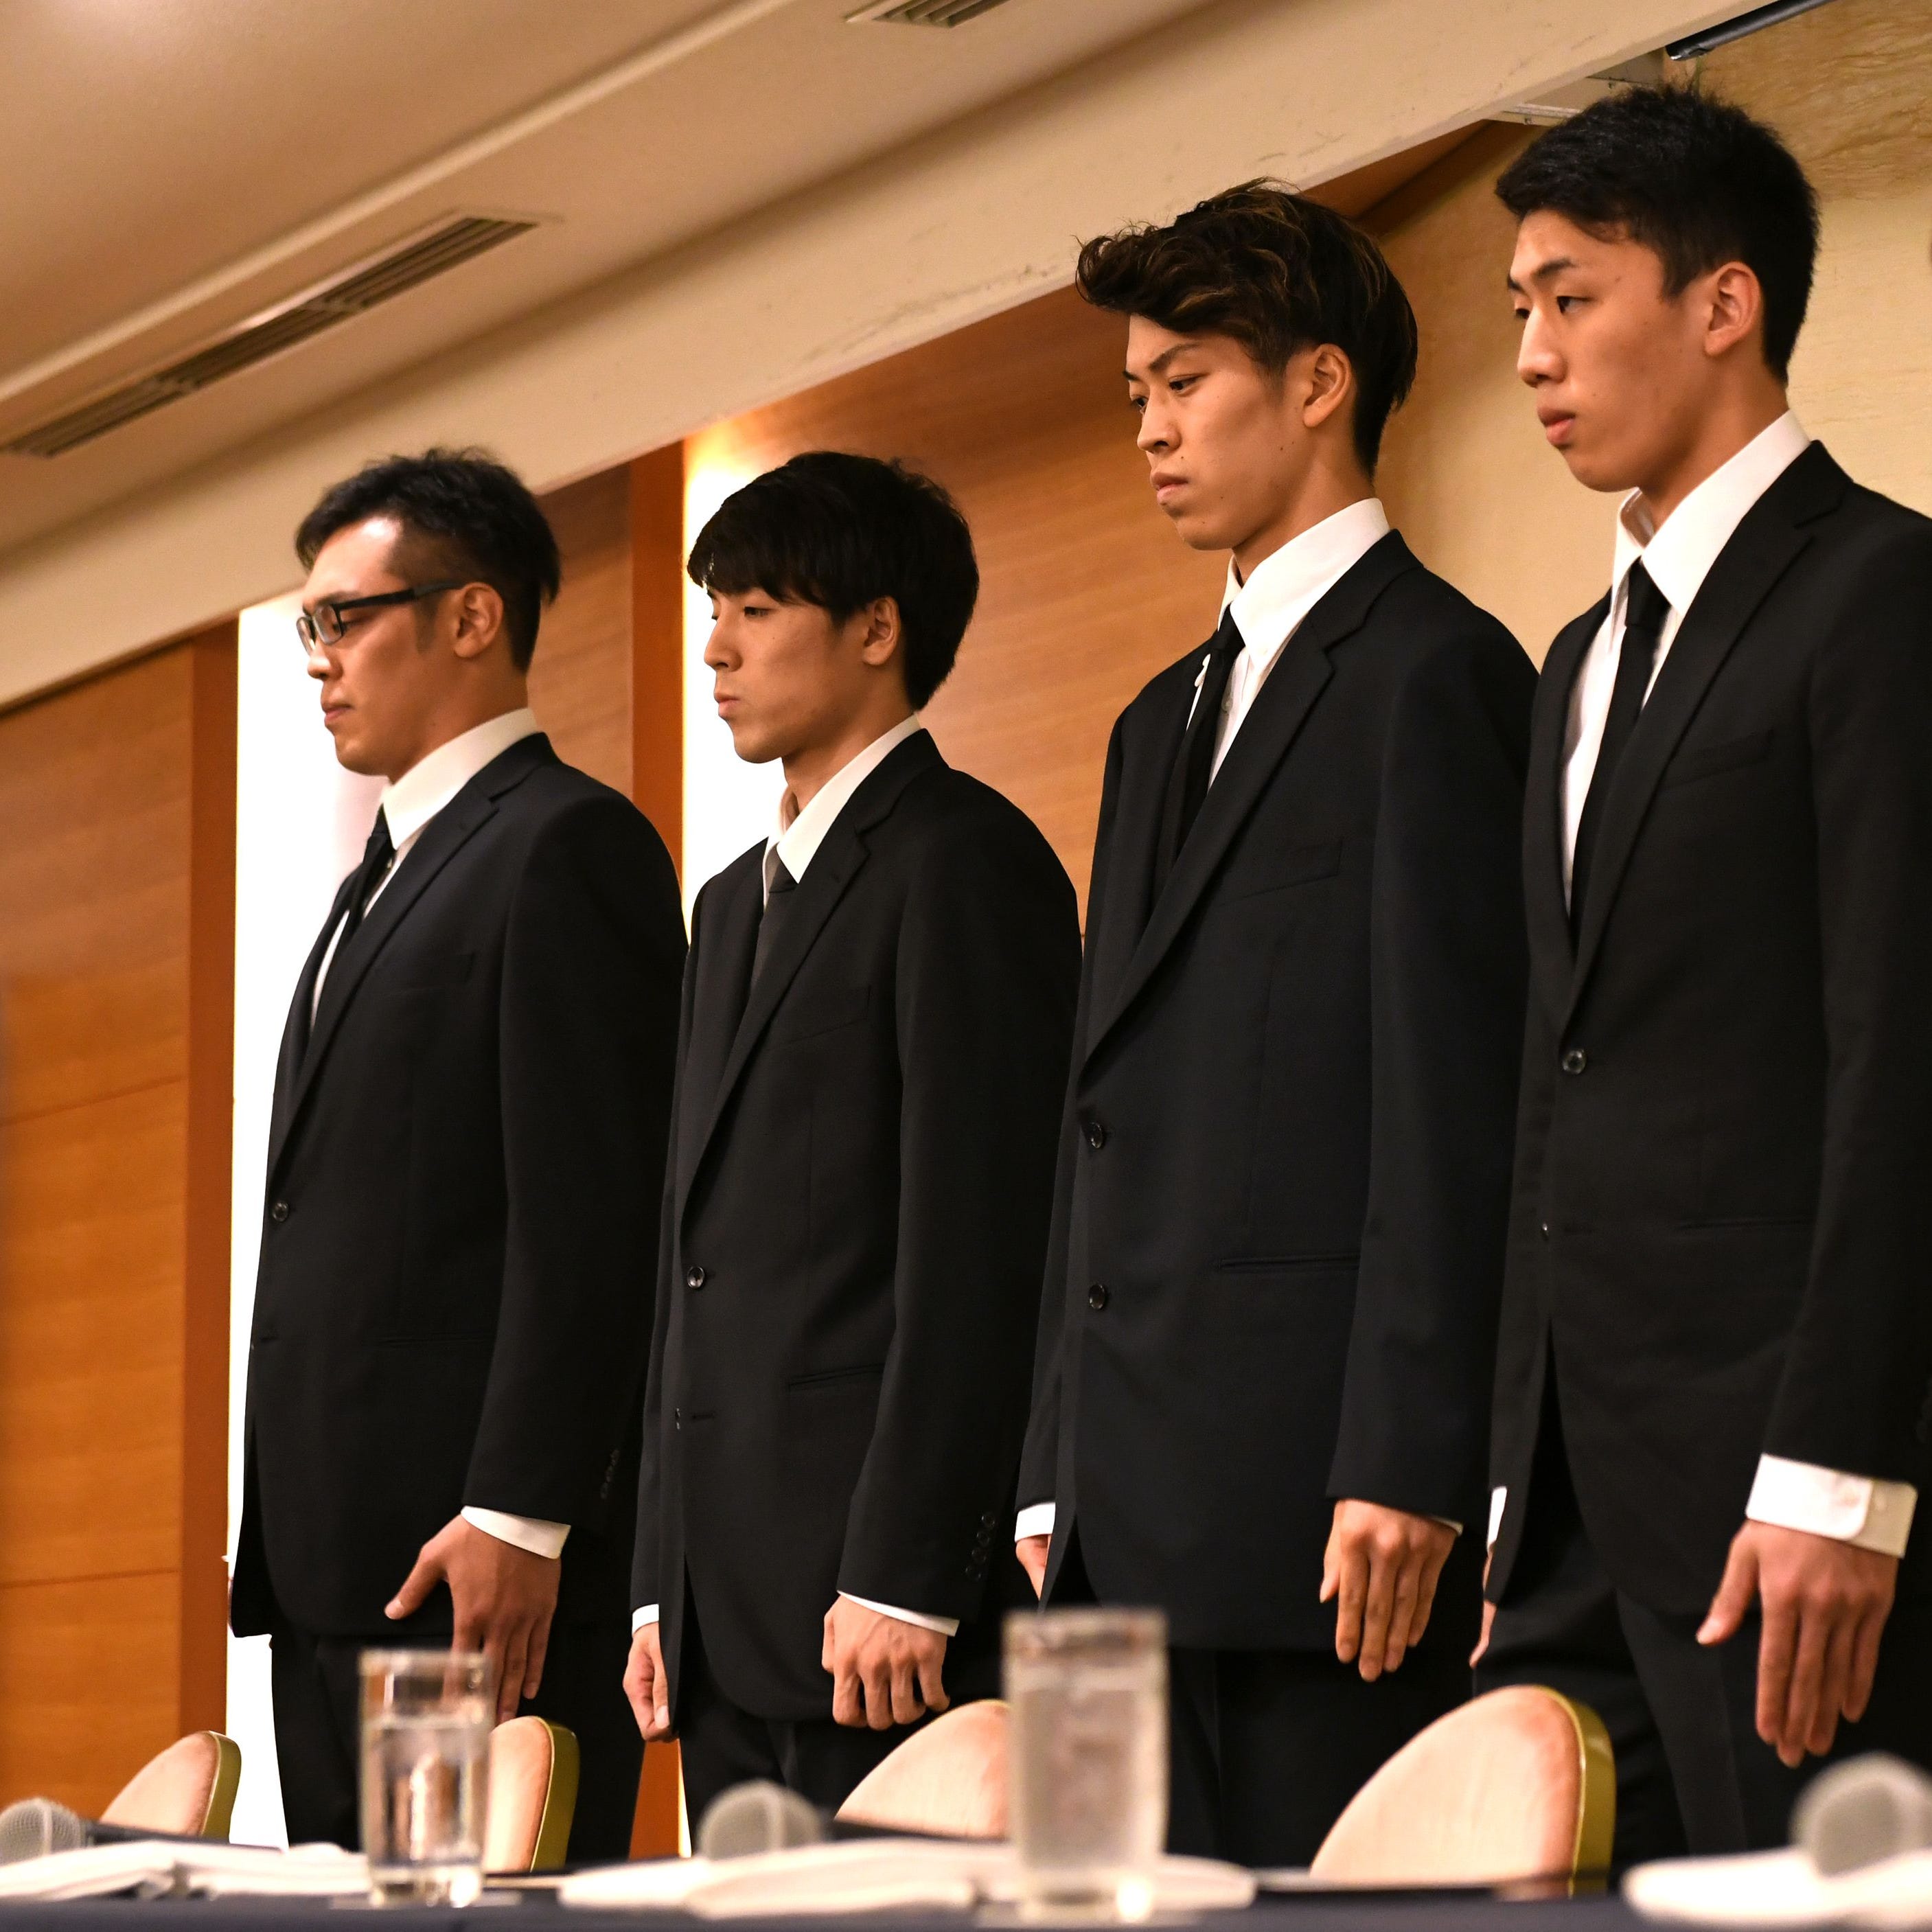 Japan's basketball players (right to left) Yuya Nagayoshi, Takuya Hashimoto, Takuma Sato, Keita Imamura, have been sent home from the Asian Games after they 'spent the night in a hotel with women.'